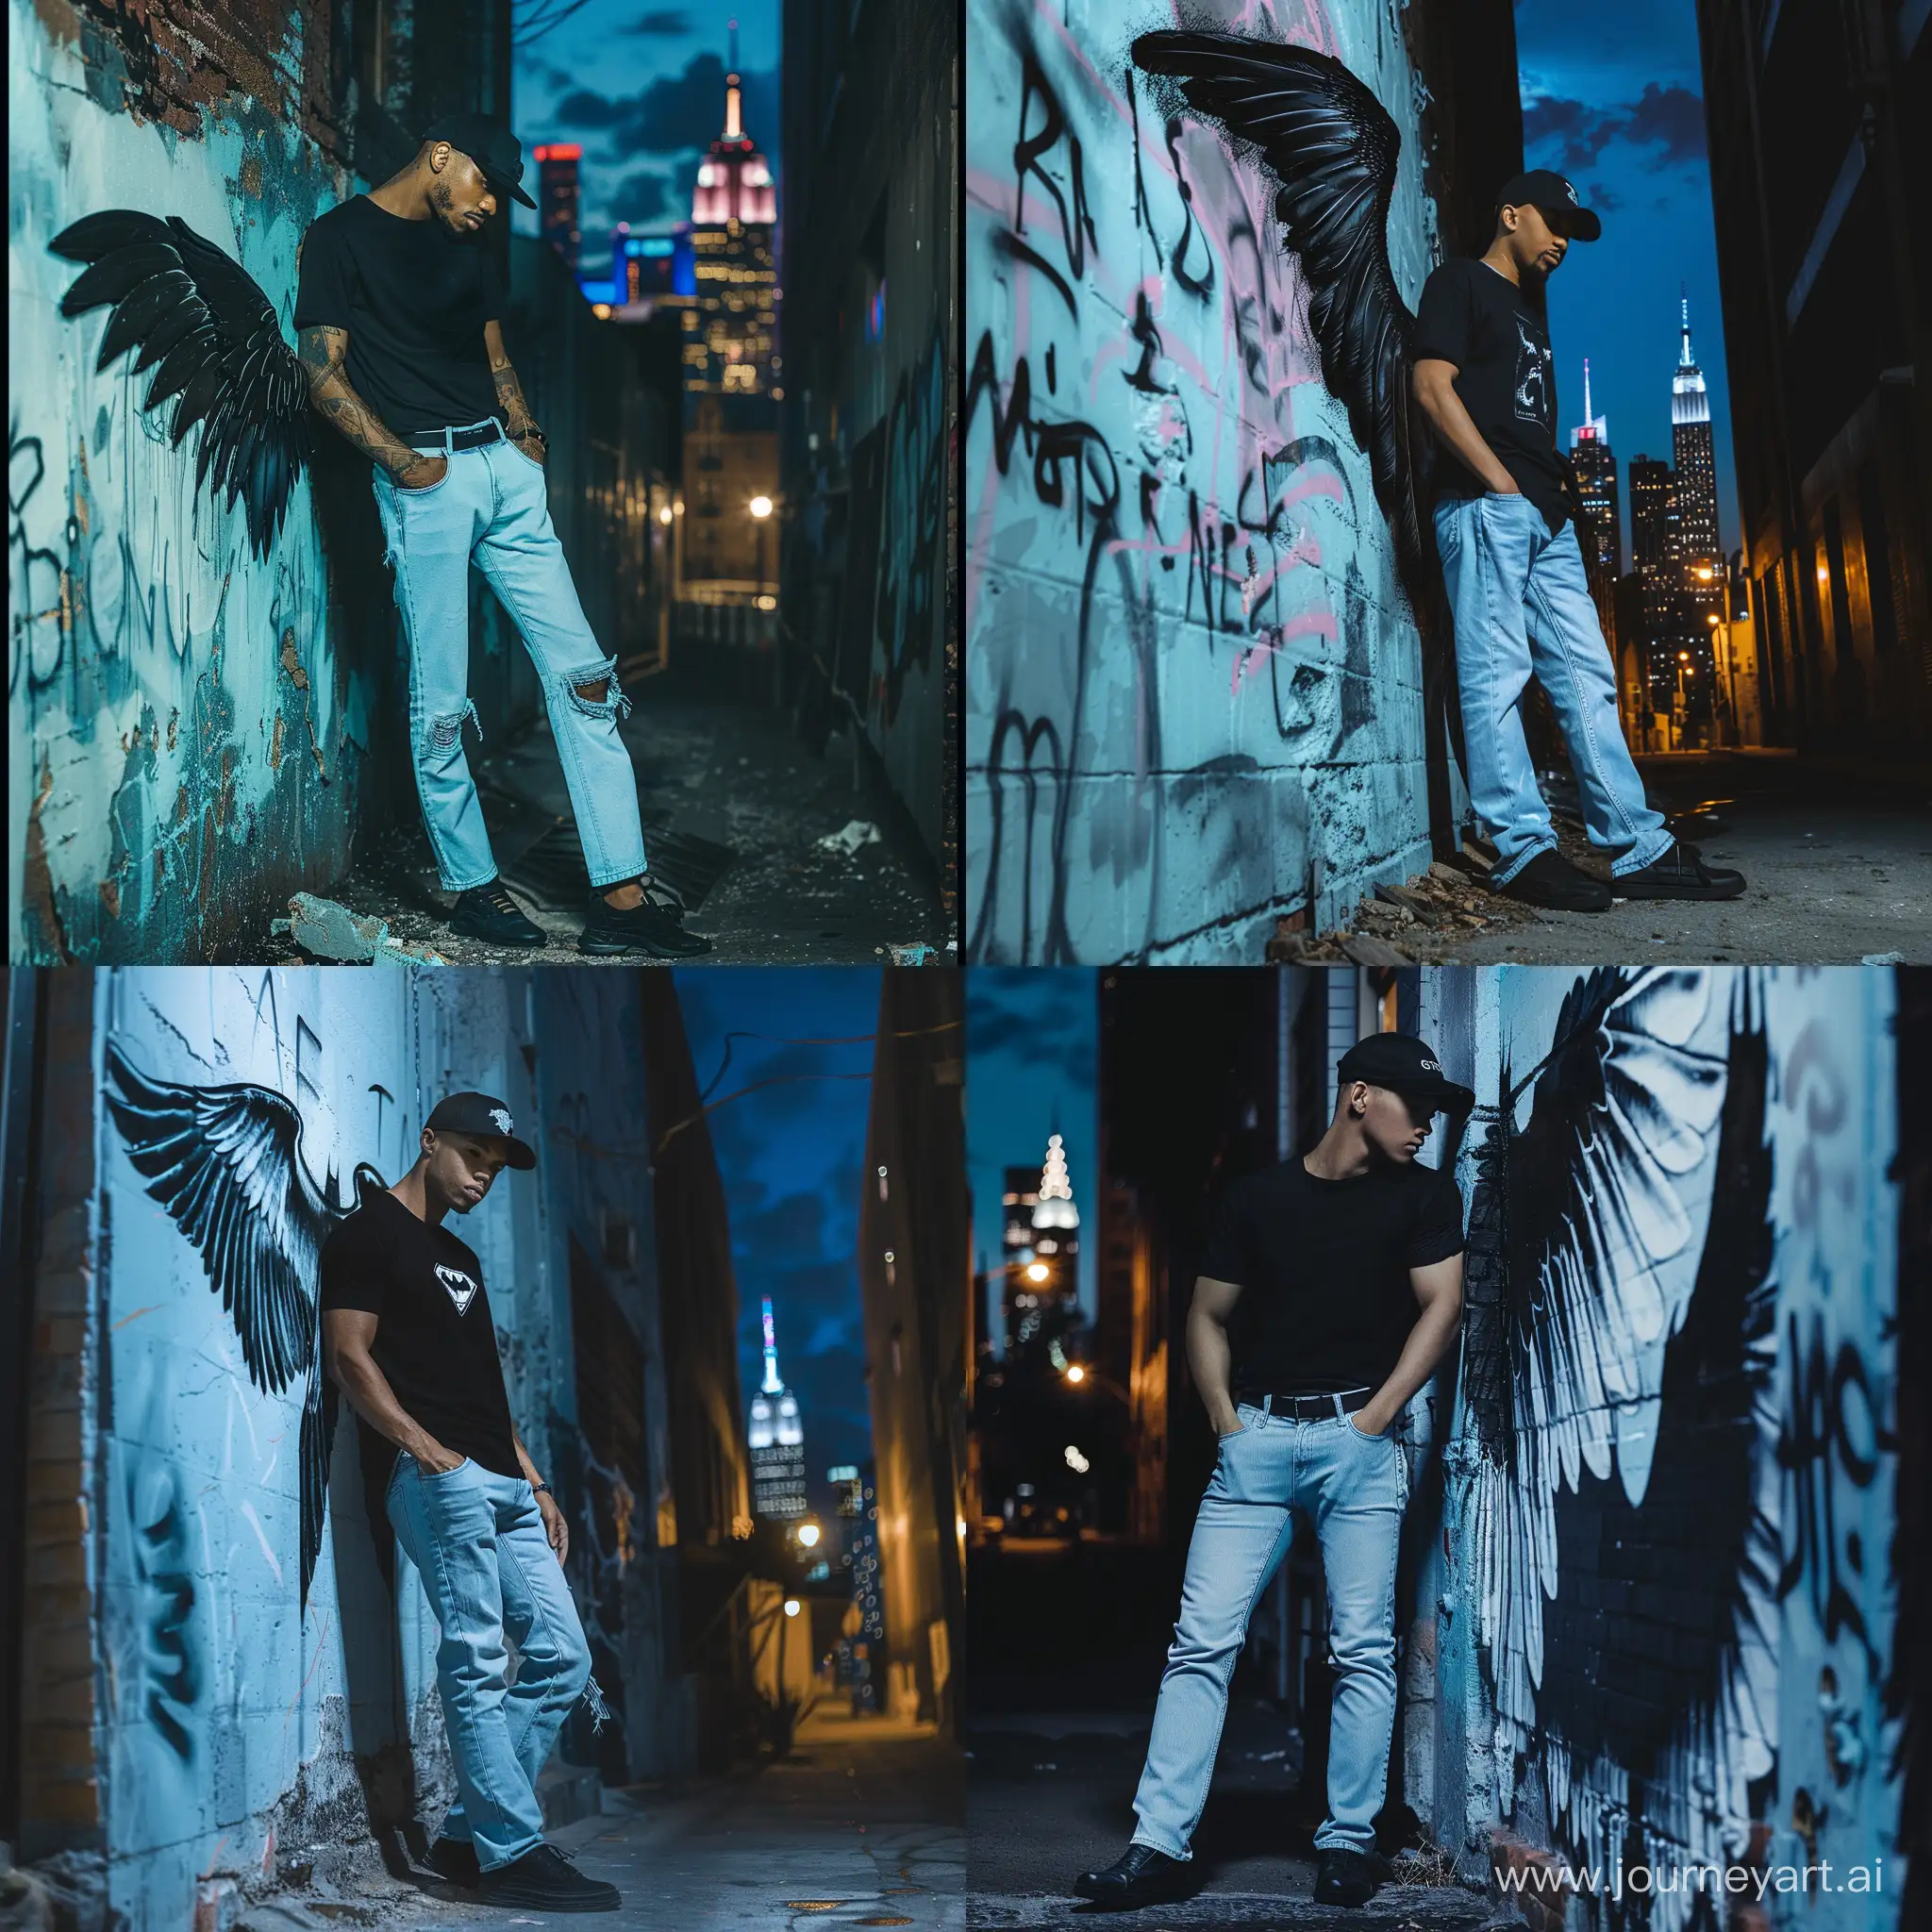 Create an image of a stylish man dressed in modern casual fashion, leaning against a wall at night. He is wearing a black cap, a black t-shirt, and light blue jeans, with black shoes. Behind him on the wall are large, artistic wings painted in black, giving the illusion that they belong to him. The setting is a dark alleyway at night, with the iconic Gotham City skyline visible in the background, illuminated by the glow of various building lights and the dark blue nocturnal sky.